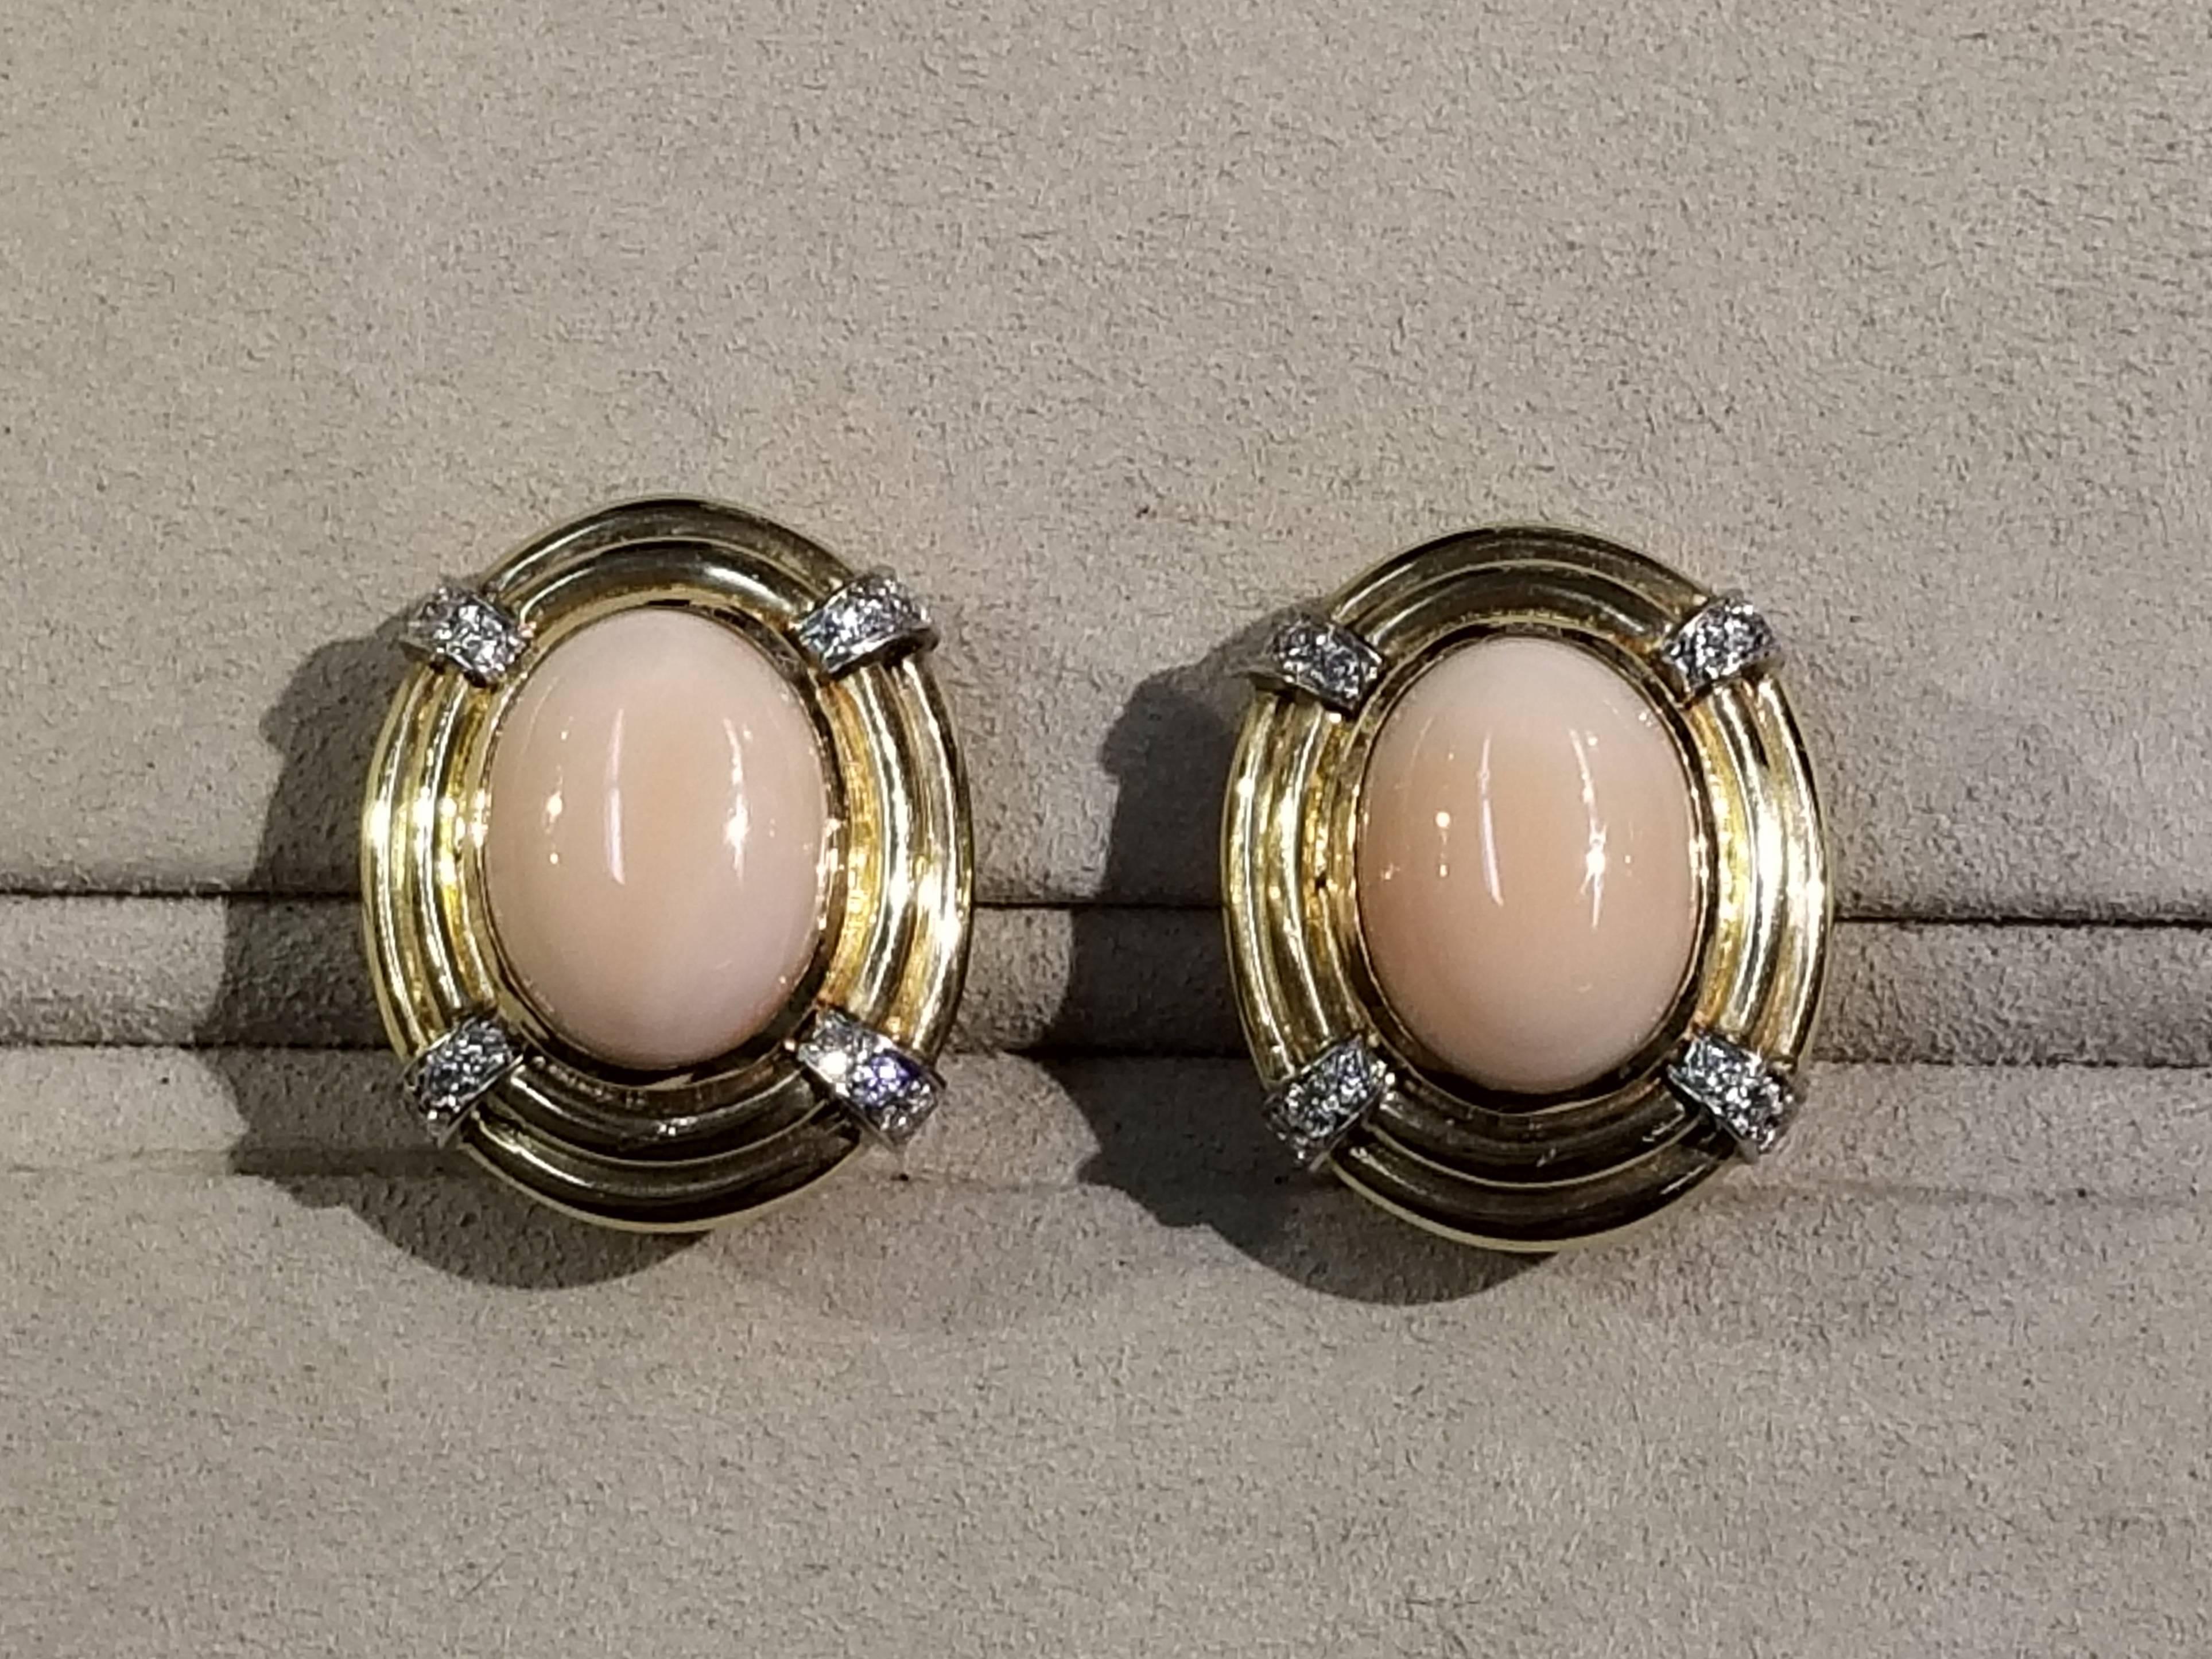 14 Karat Y/G Coral and Diamond Earrings In Excellent Condition For Sale In Santa Fe, NM